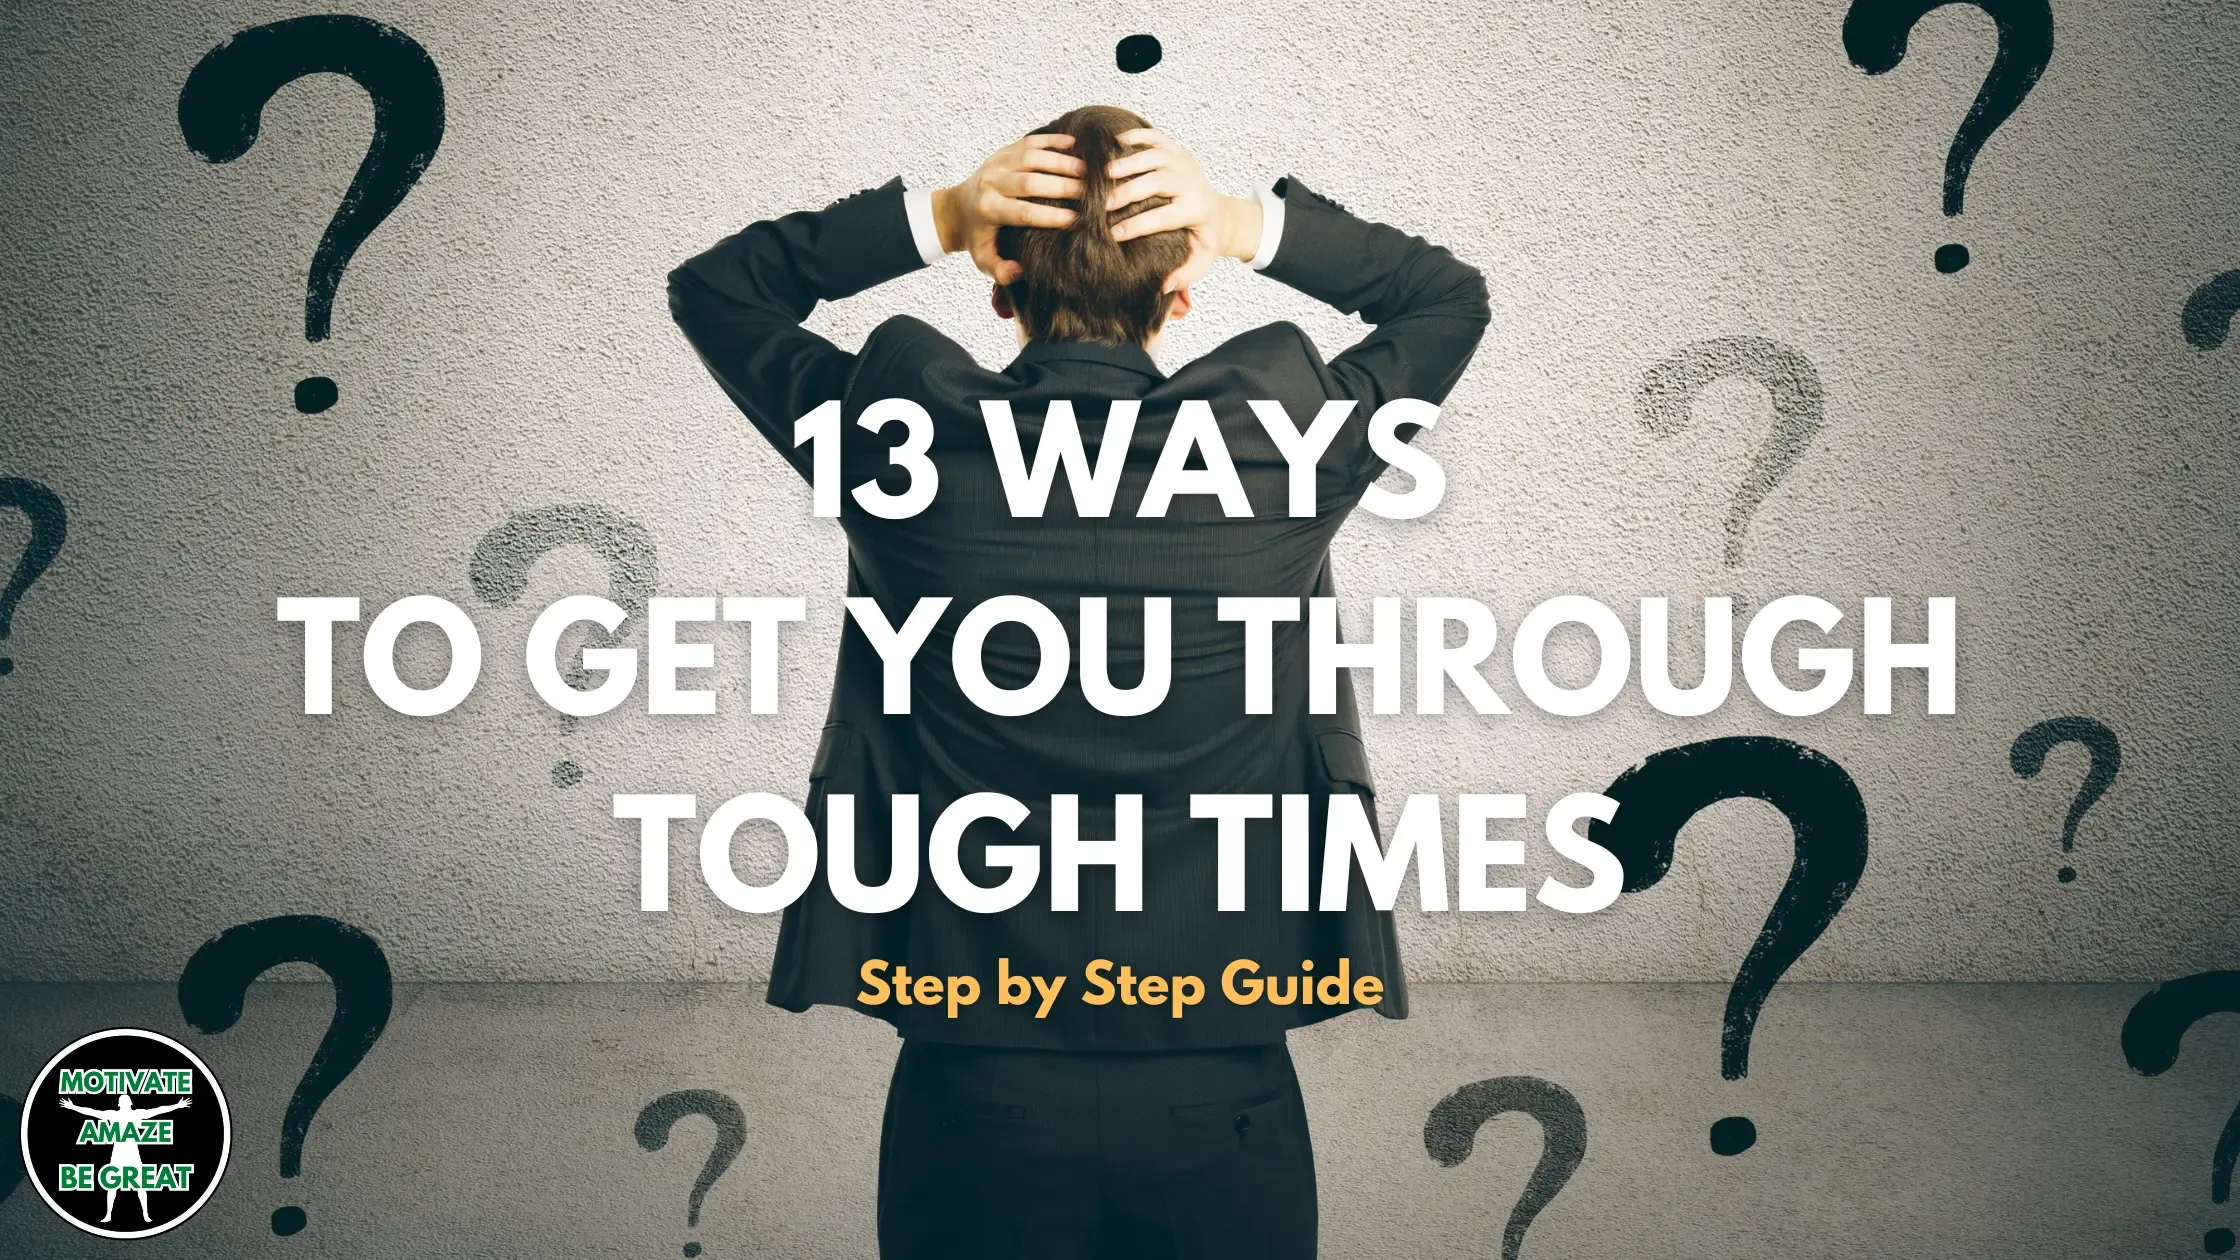 Header image of the article: "Ways To Get Through Tough Times - Step by Step Guide on How to Get Through Tough Times.